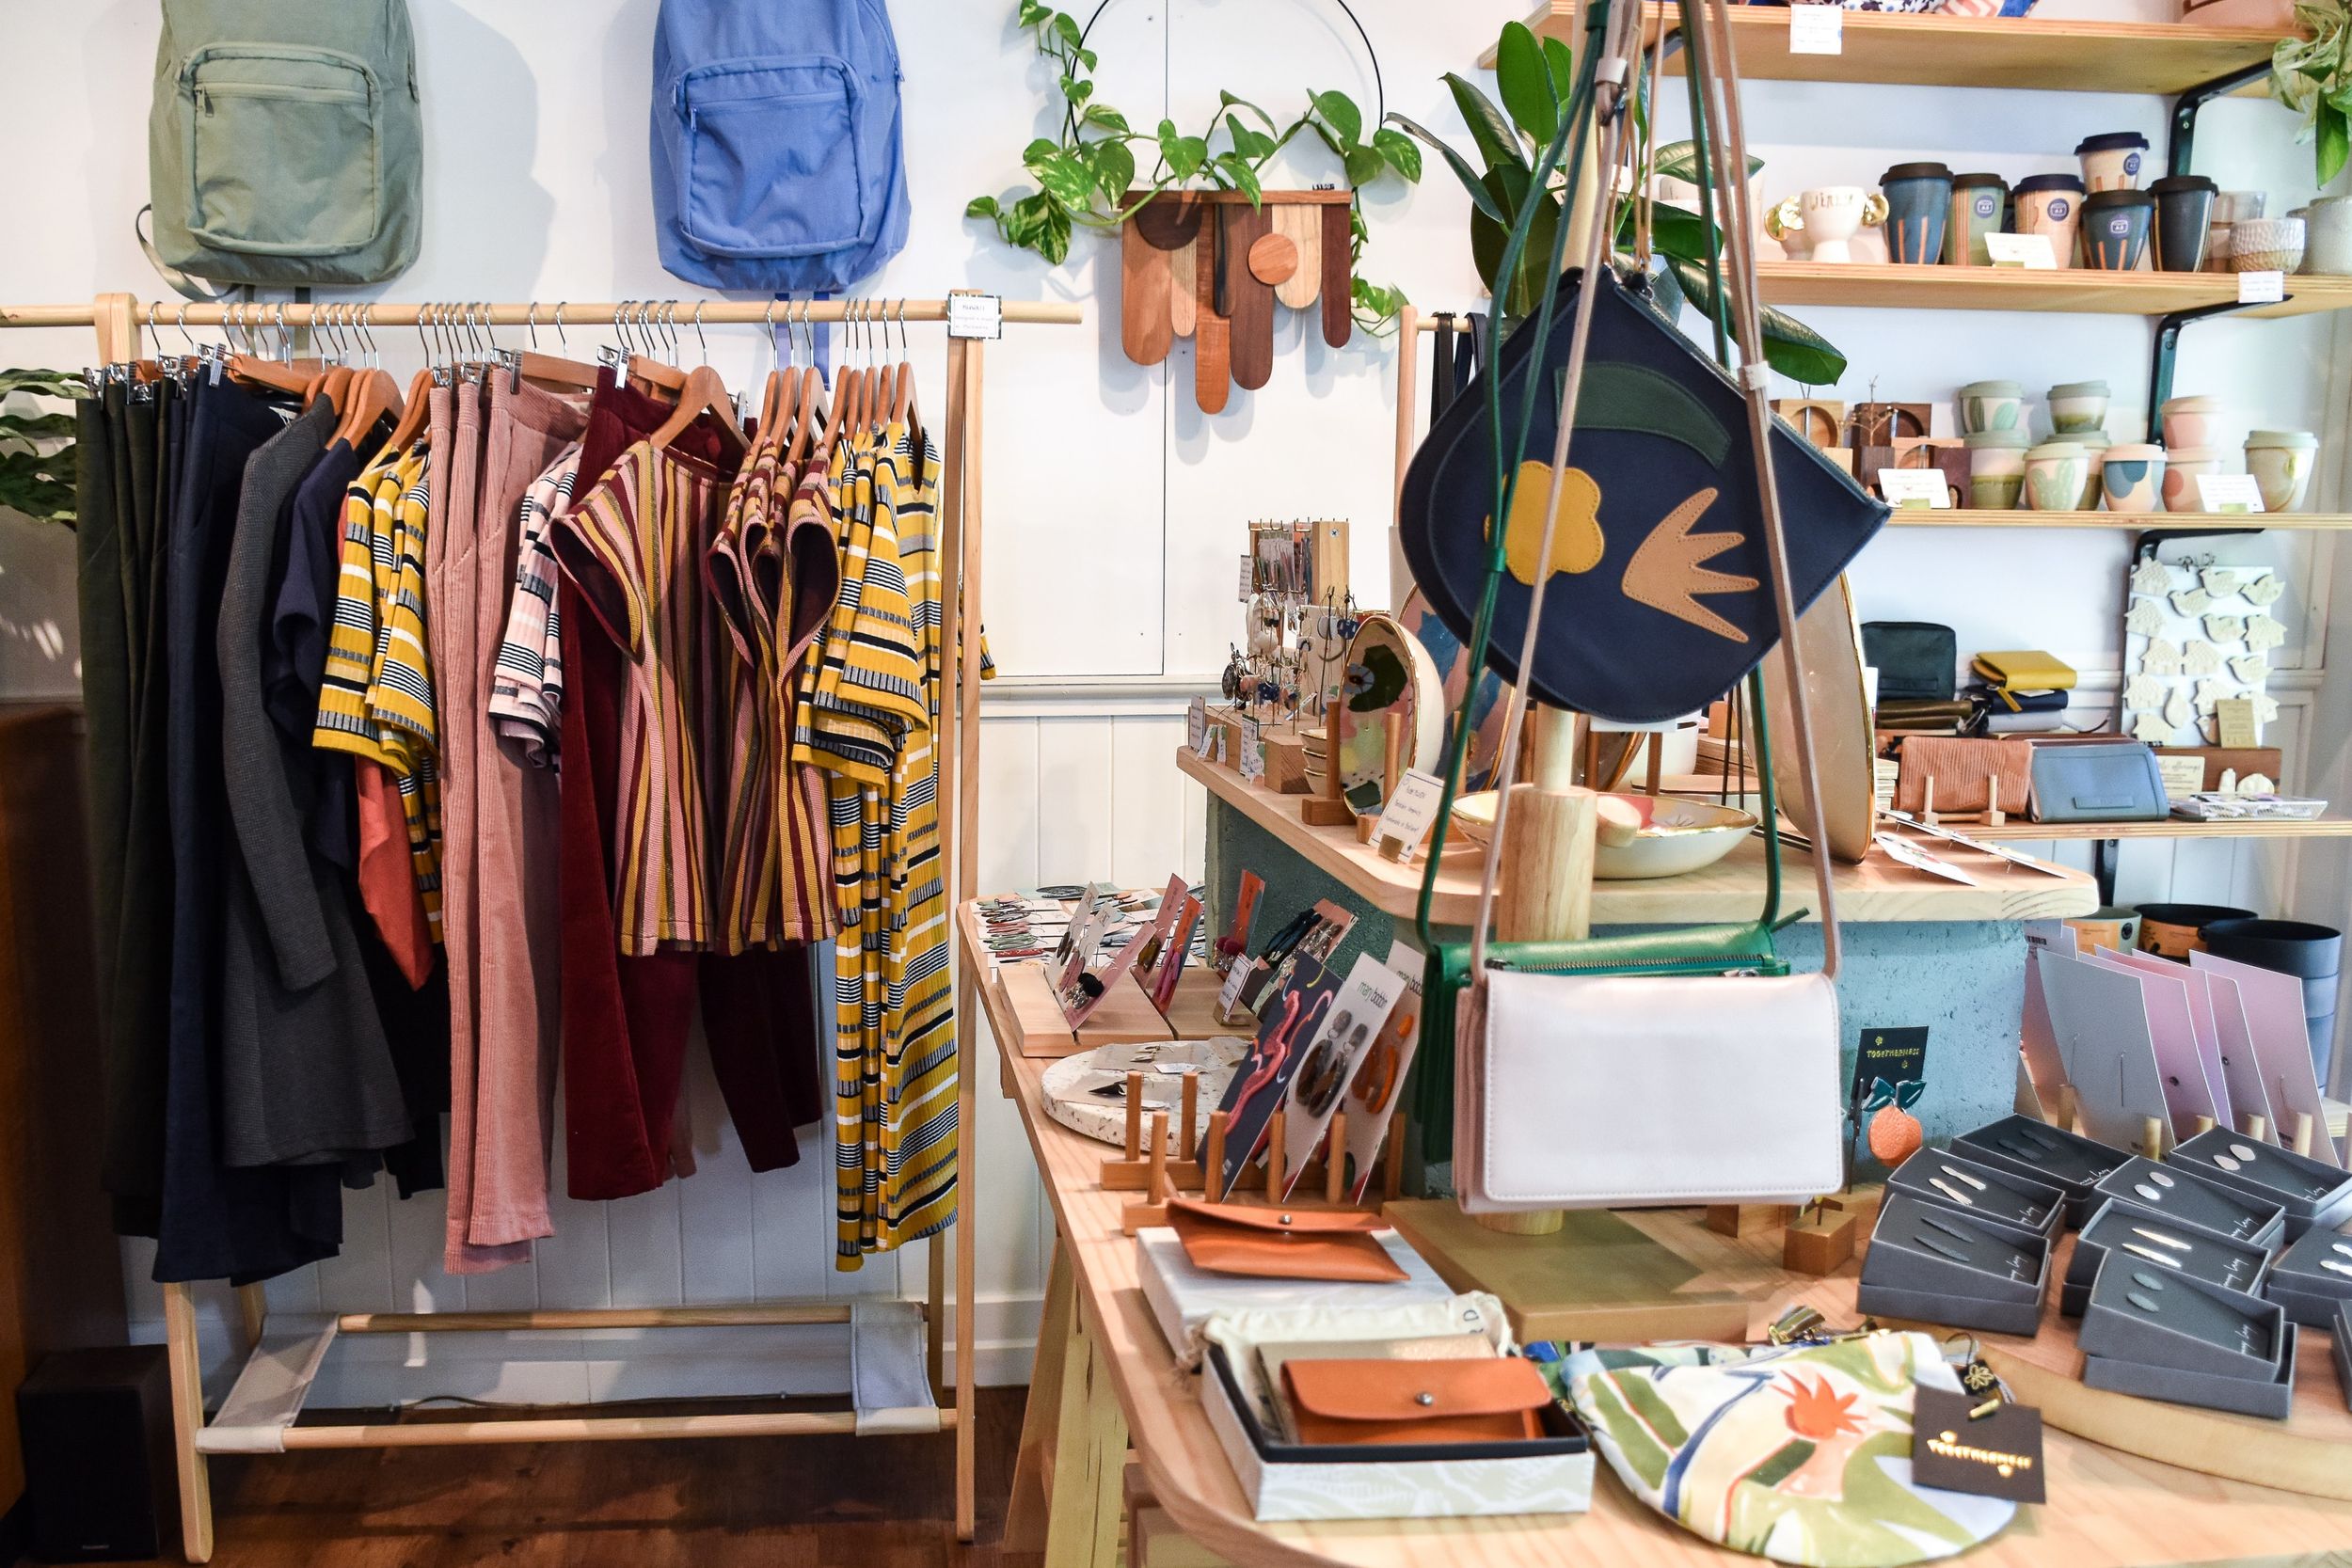 Small clothing store filled with vibrant textiles and art